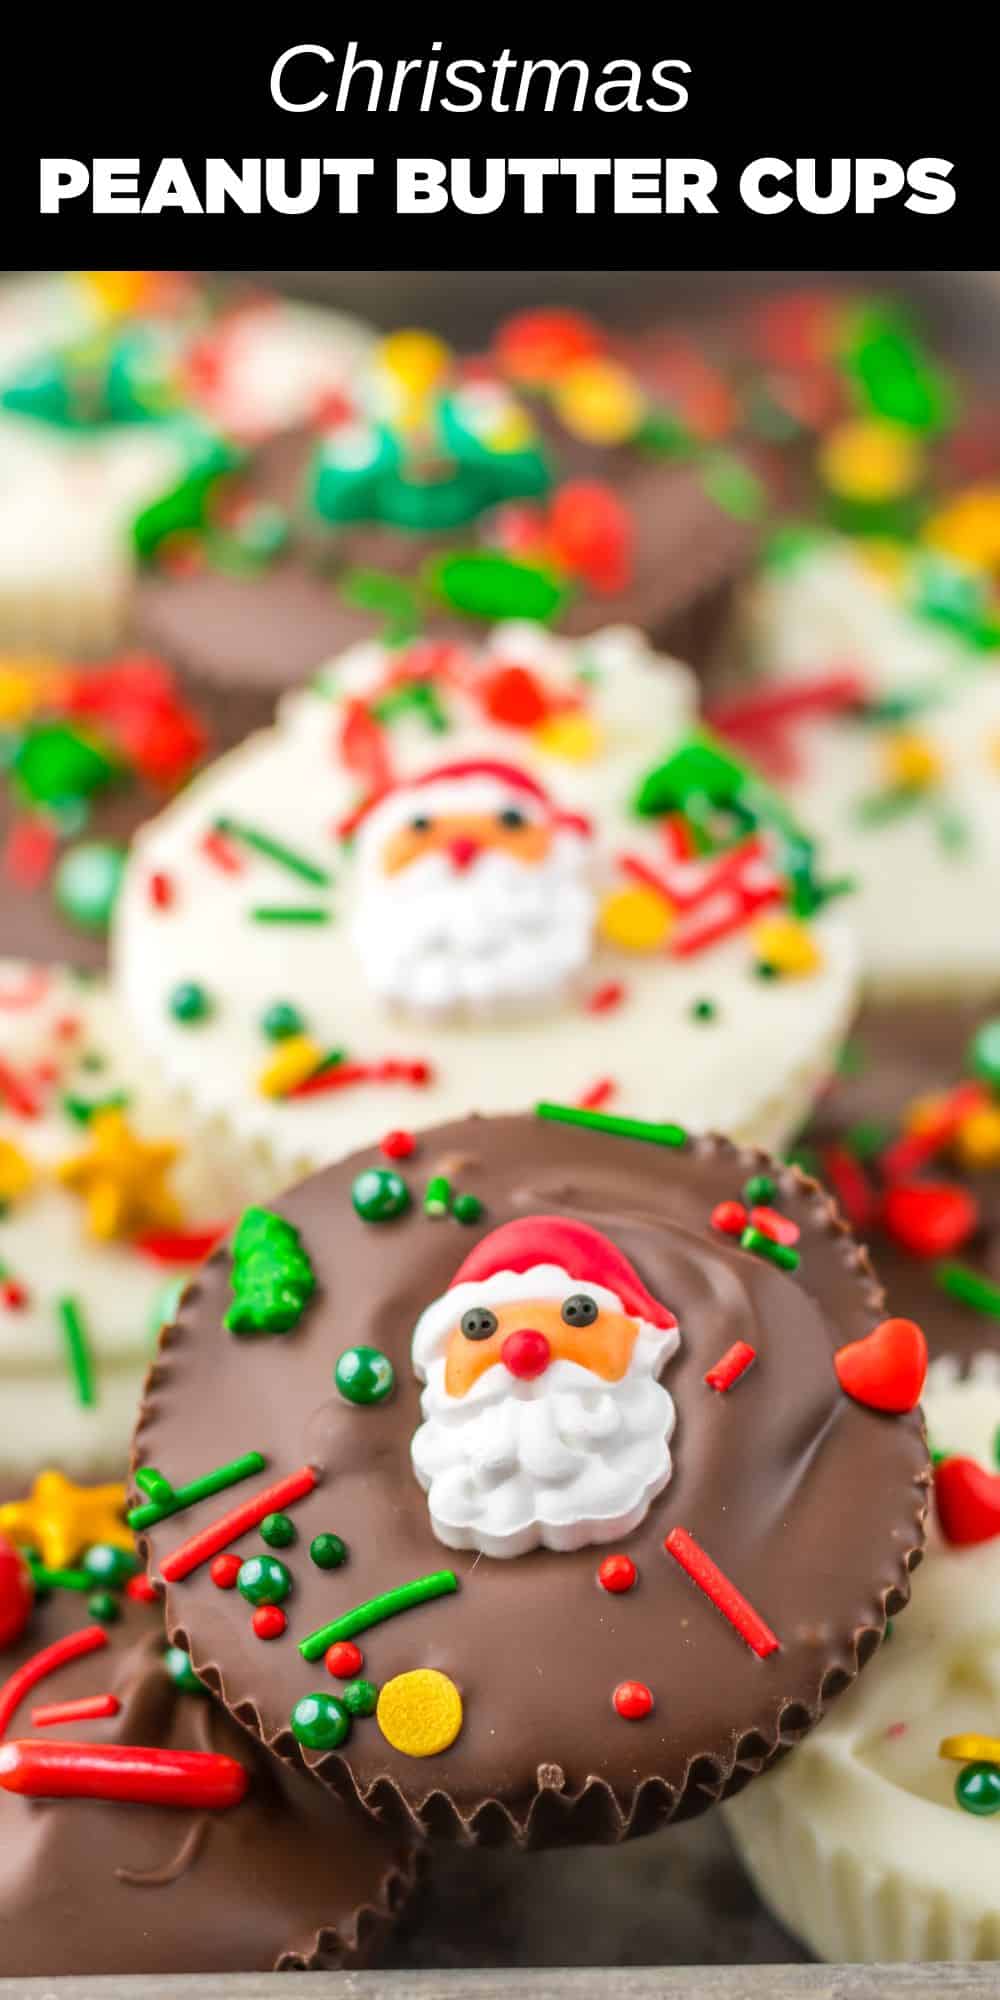 Peanut butter cups are always delicious but even more so when you make them yourself! These delicious peanut butter cups are coated with white and dark with festive sprinkles that make them perfect for giving out as gifts or adding to the holiday dessert table.